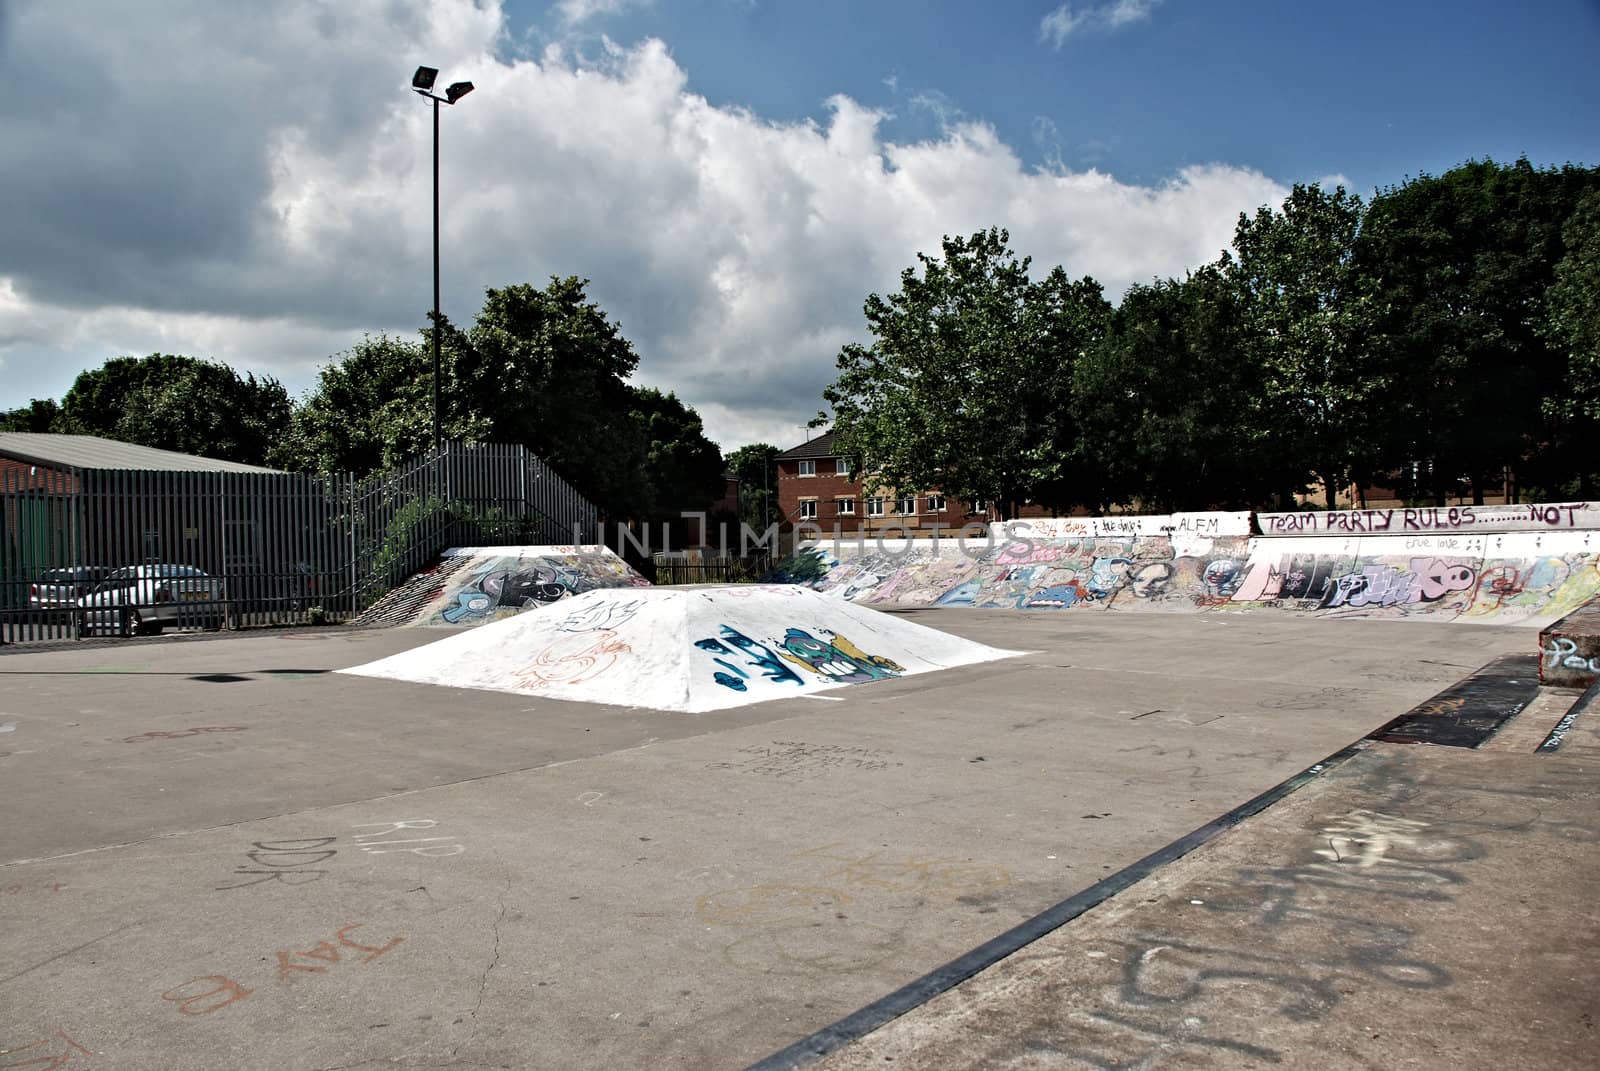 A photograph of a skate boarding park with ramps and graffiti